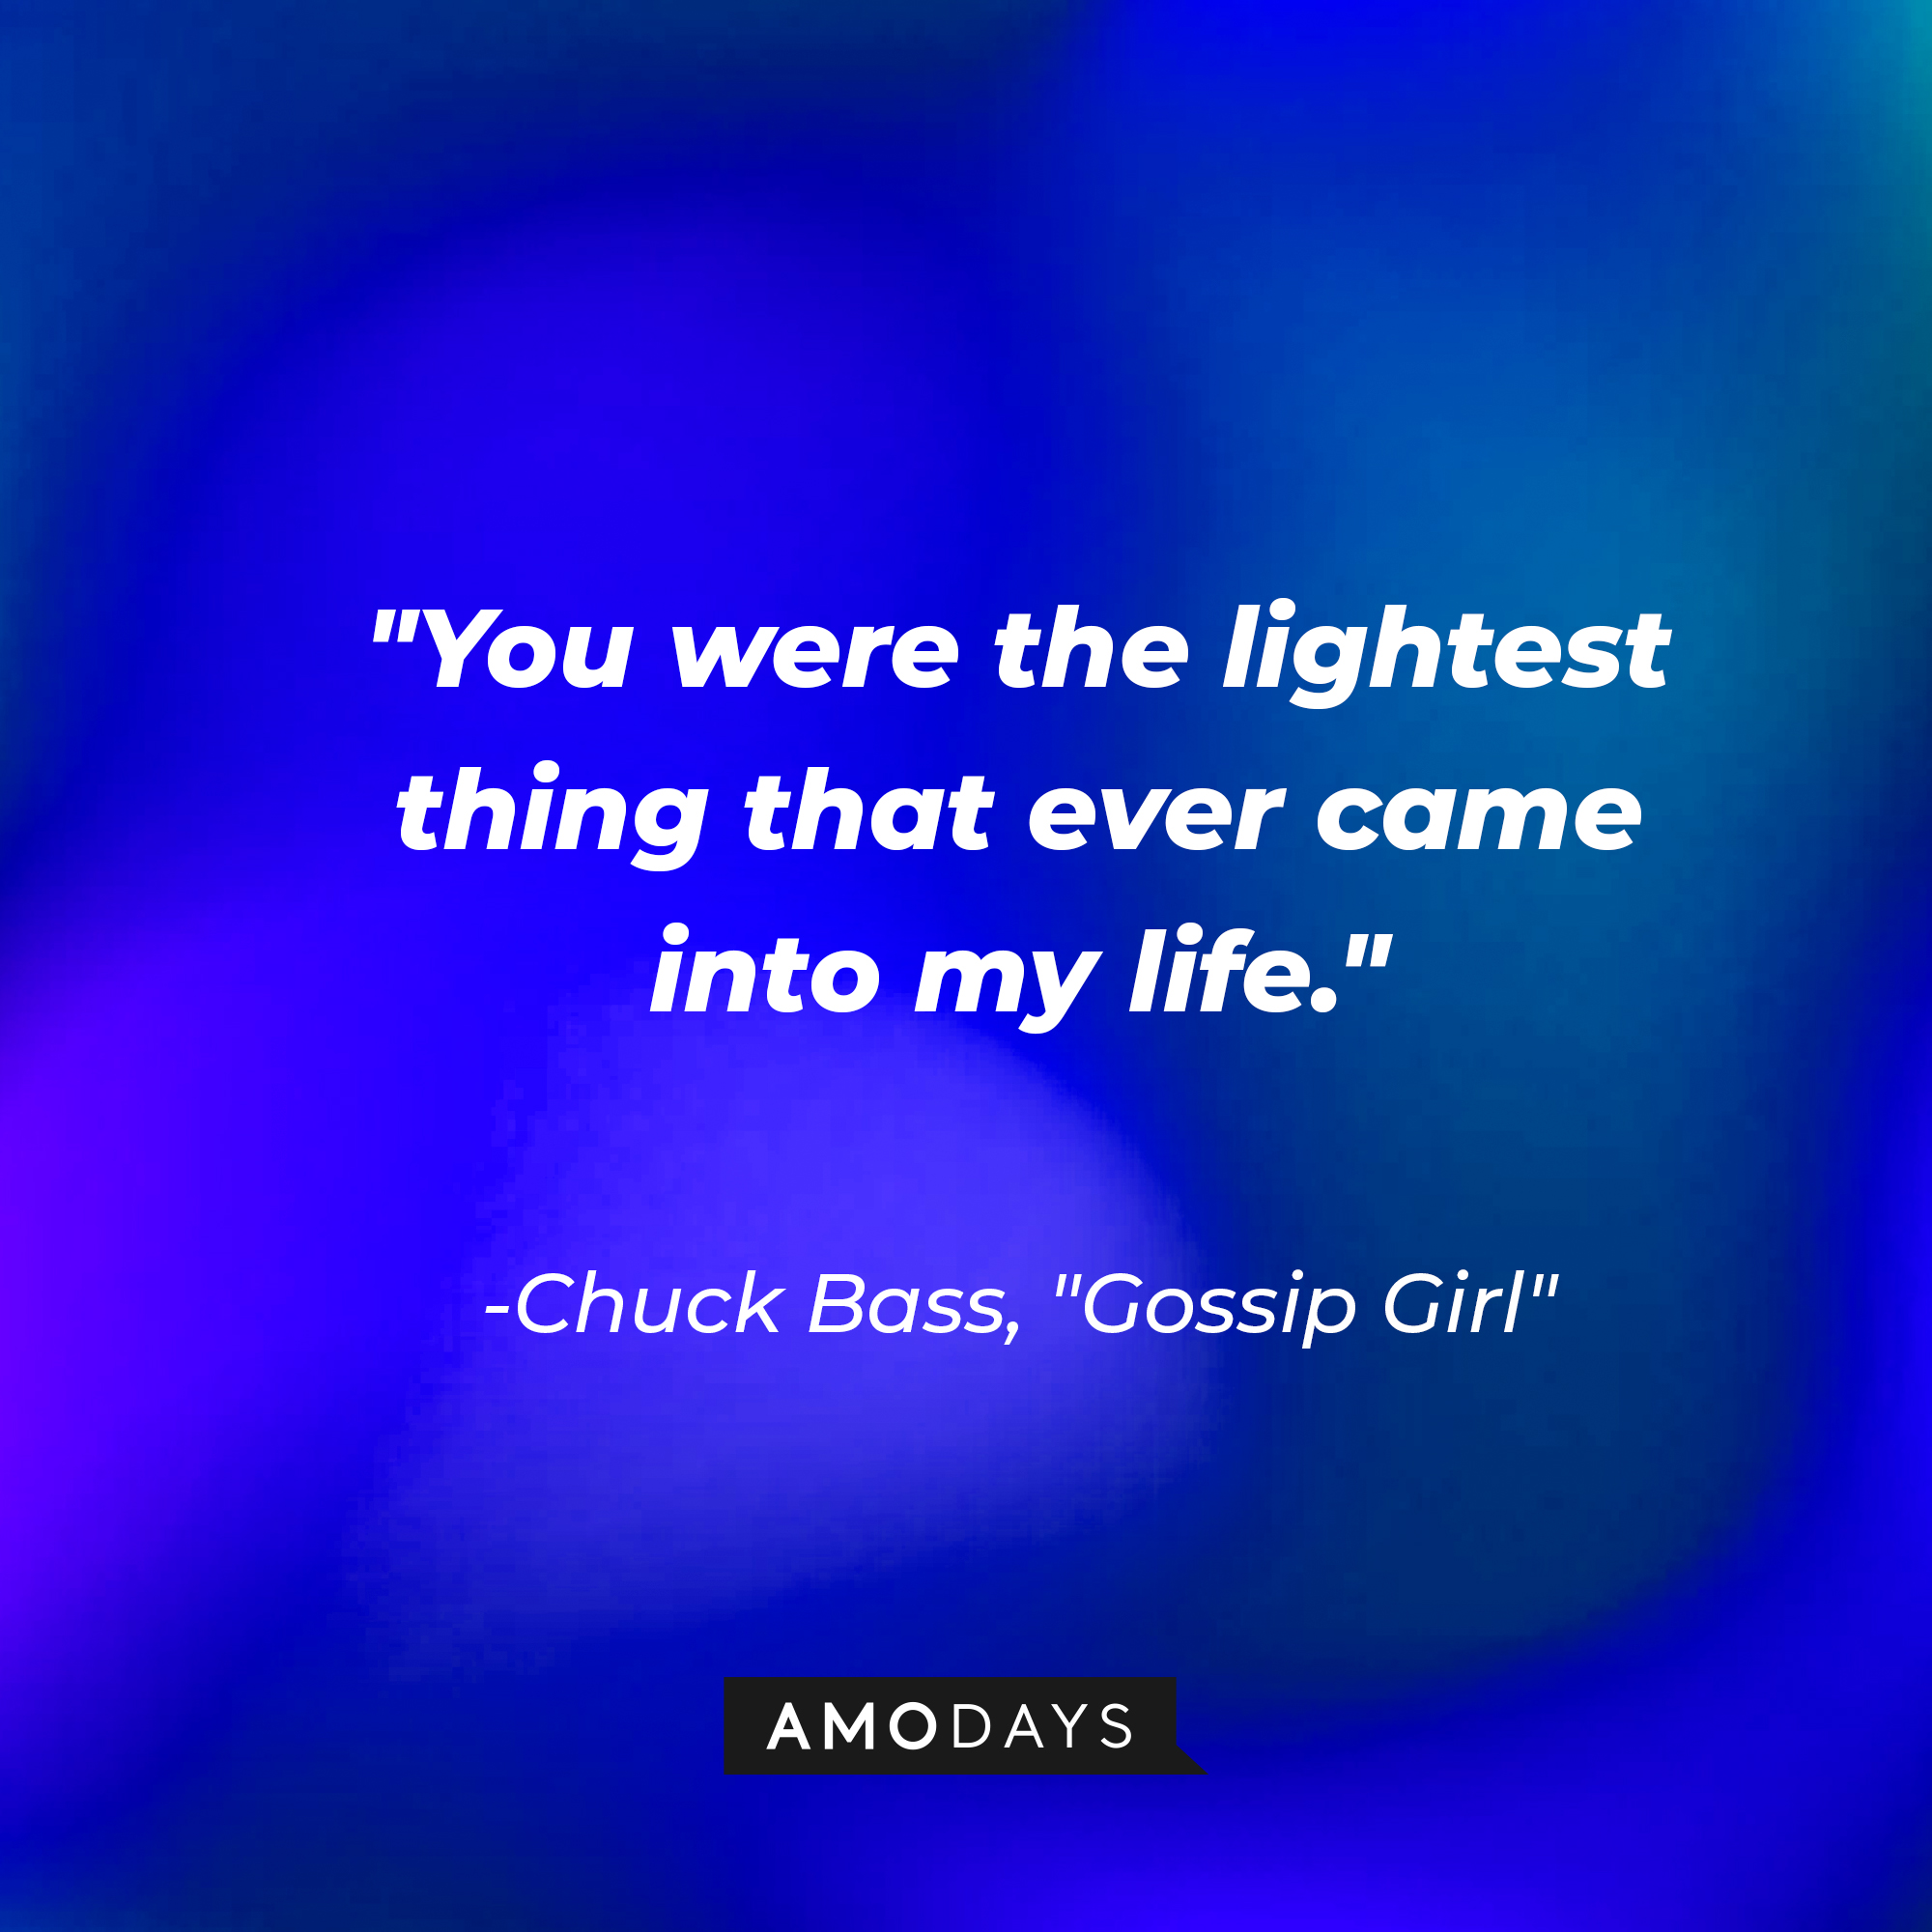 Chuck Bass' quote: "You were the lightest thing that ever came into my life." | Source: AmoDays